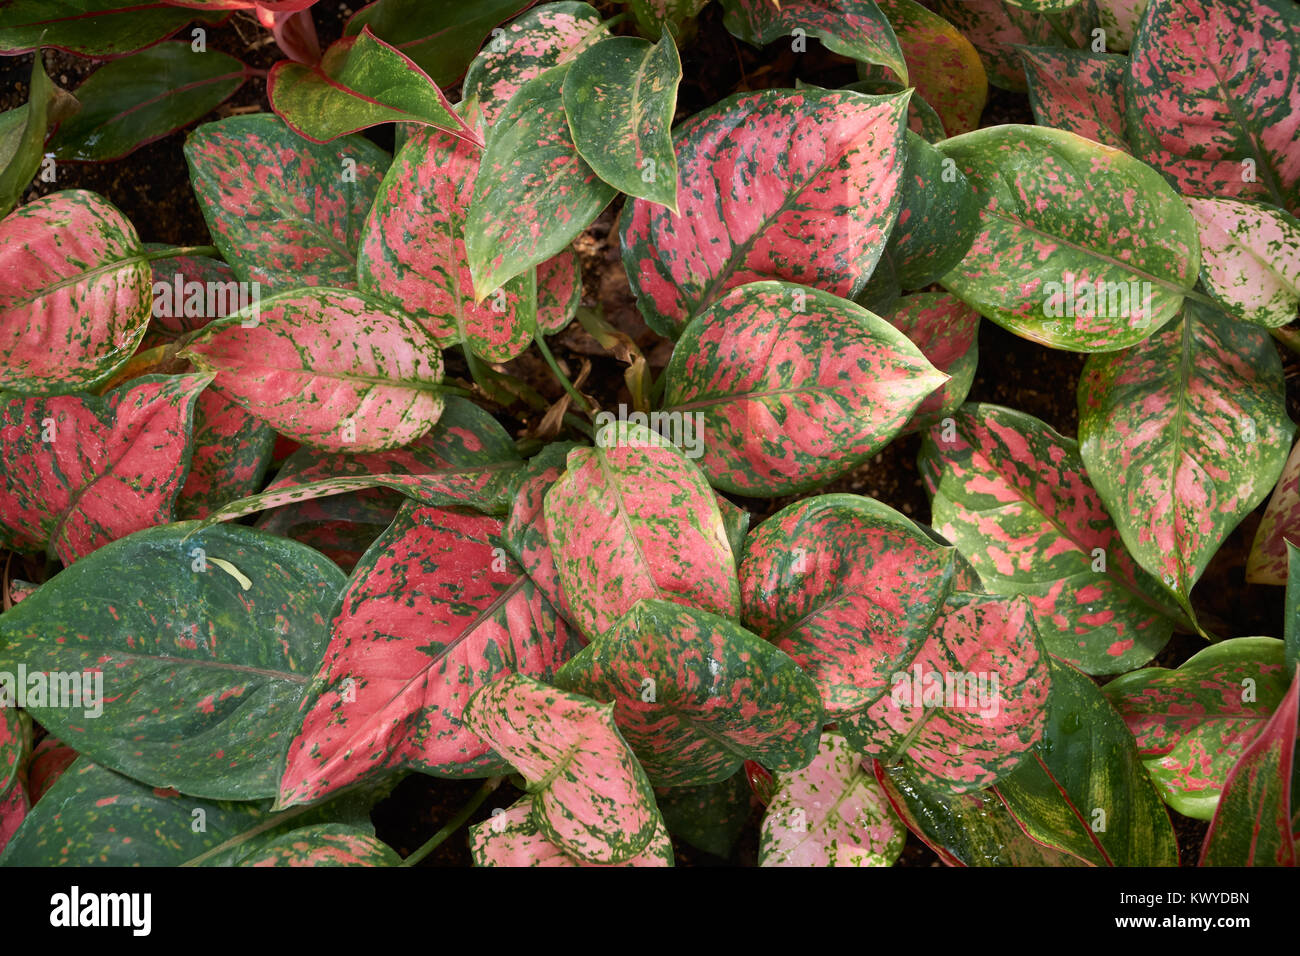 Aglaonema siam aurora, also known as red Aglaonema or Chinese evergreen, a genus of flowering plants in the arum family. Stock Photo